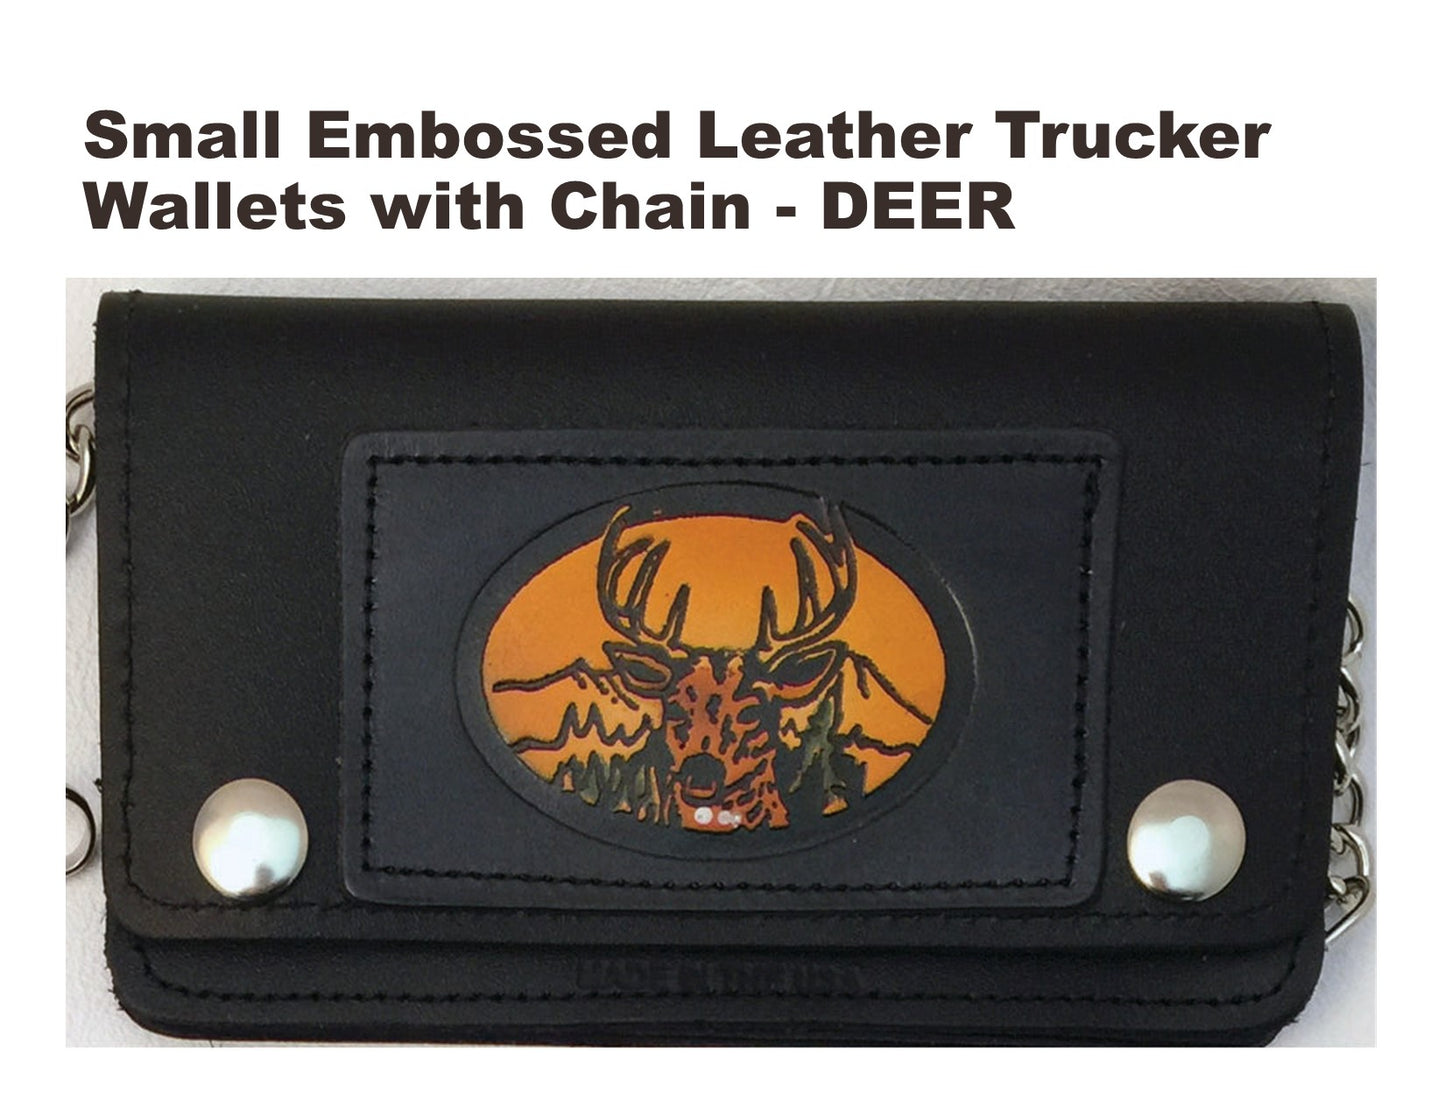 Handcrafted Leather Bickers/Truckers Wallets